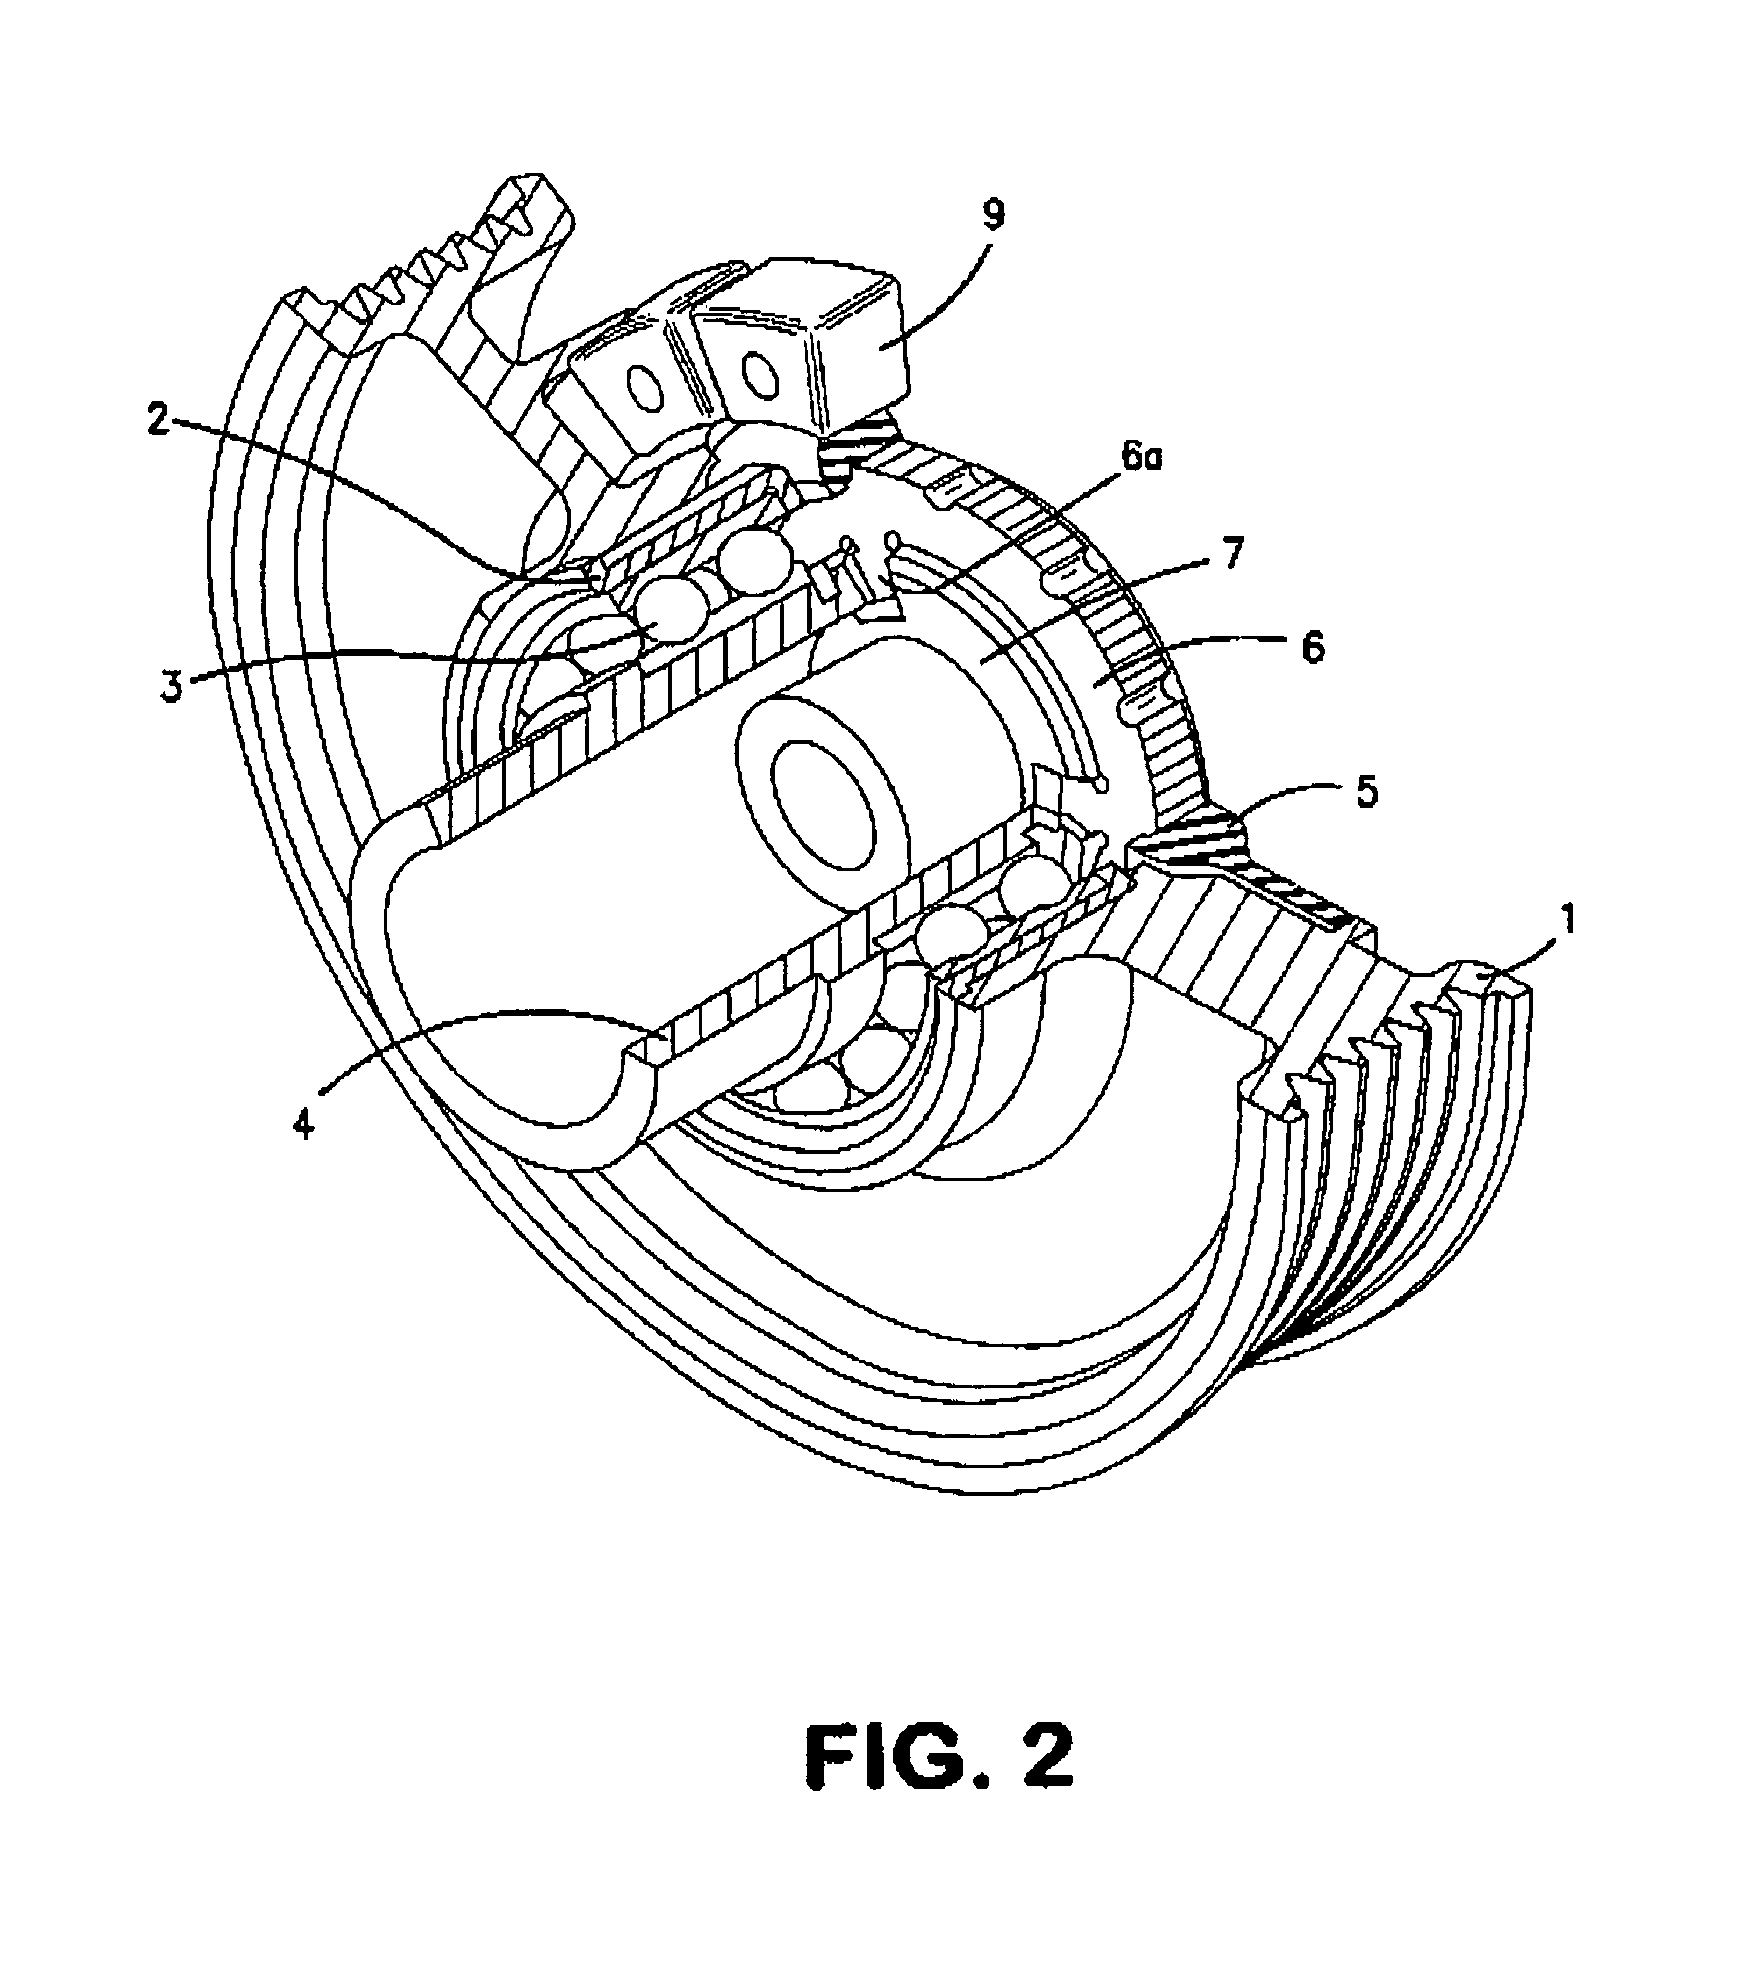 Apparatus for transmitting a torque from a motor to a compressor